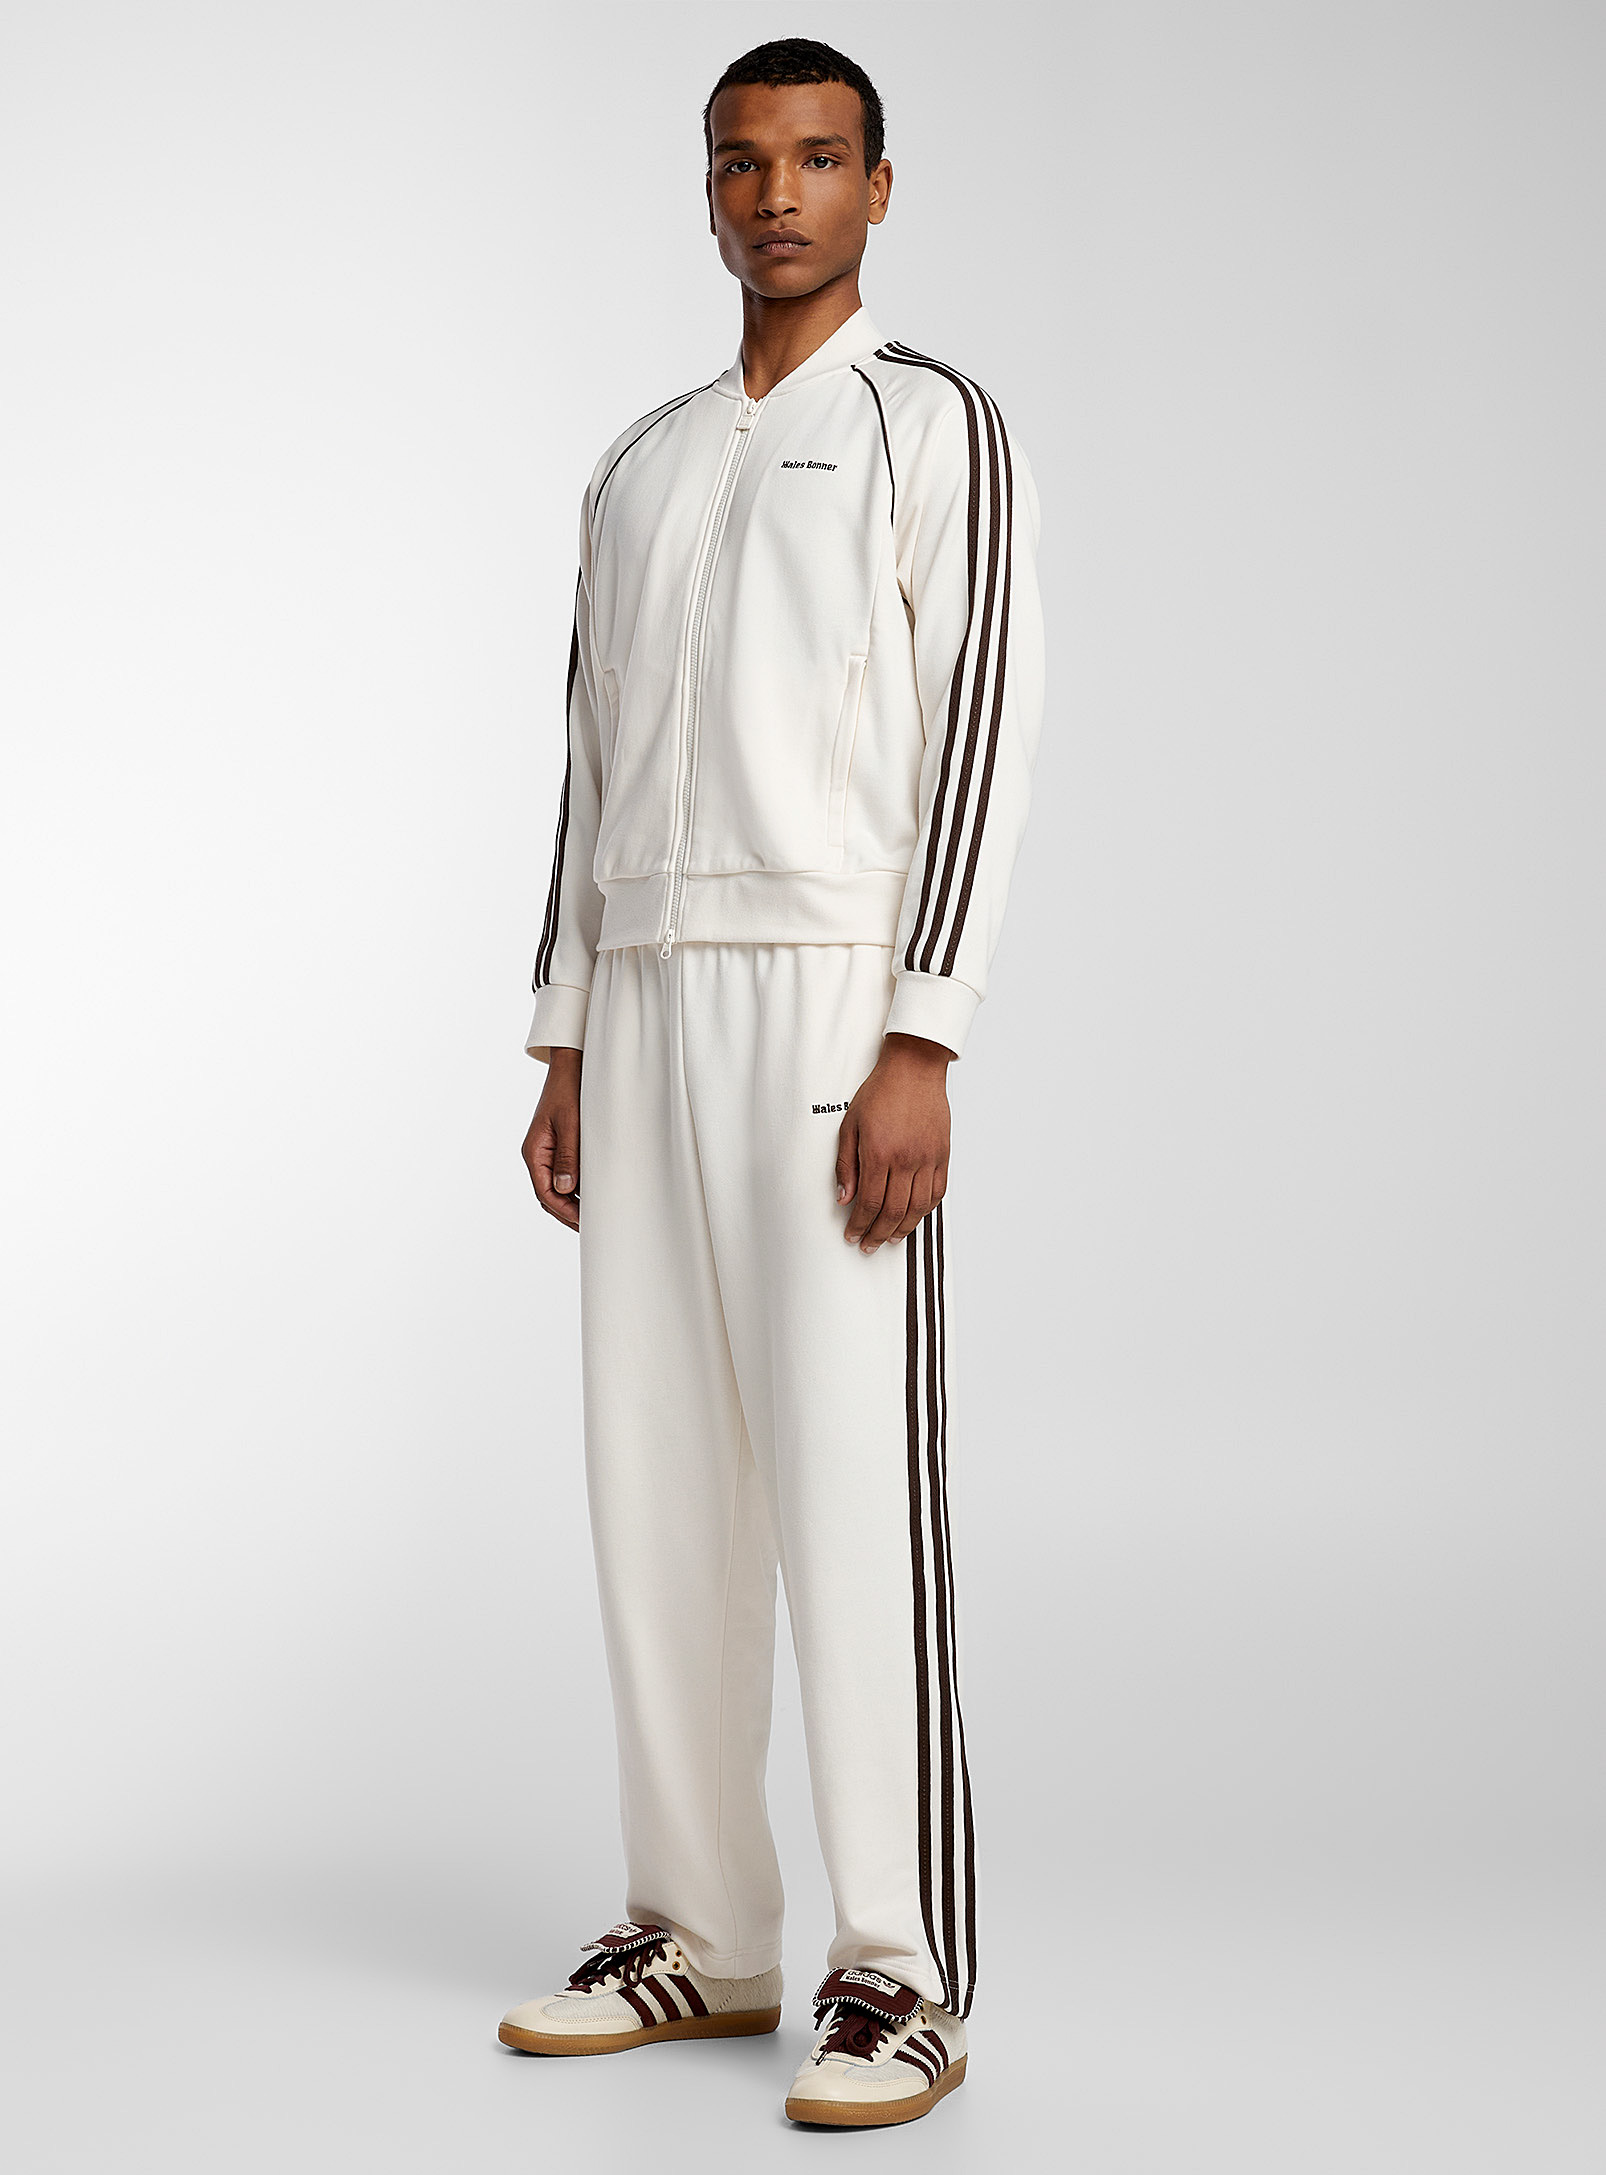 Adidas X Wales Bonner Statement Track Pant In Ivory White